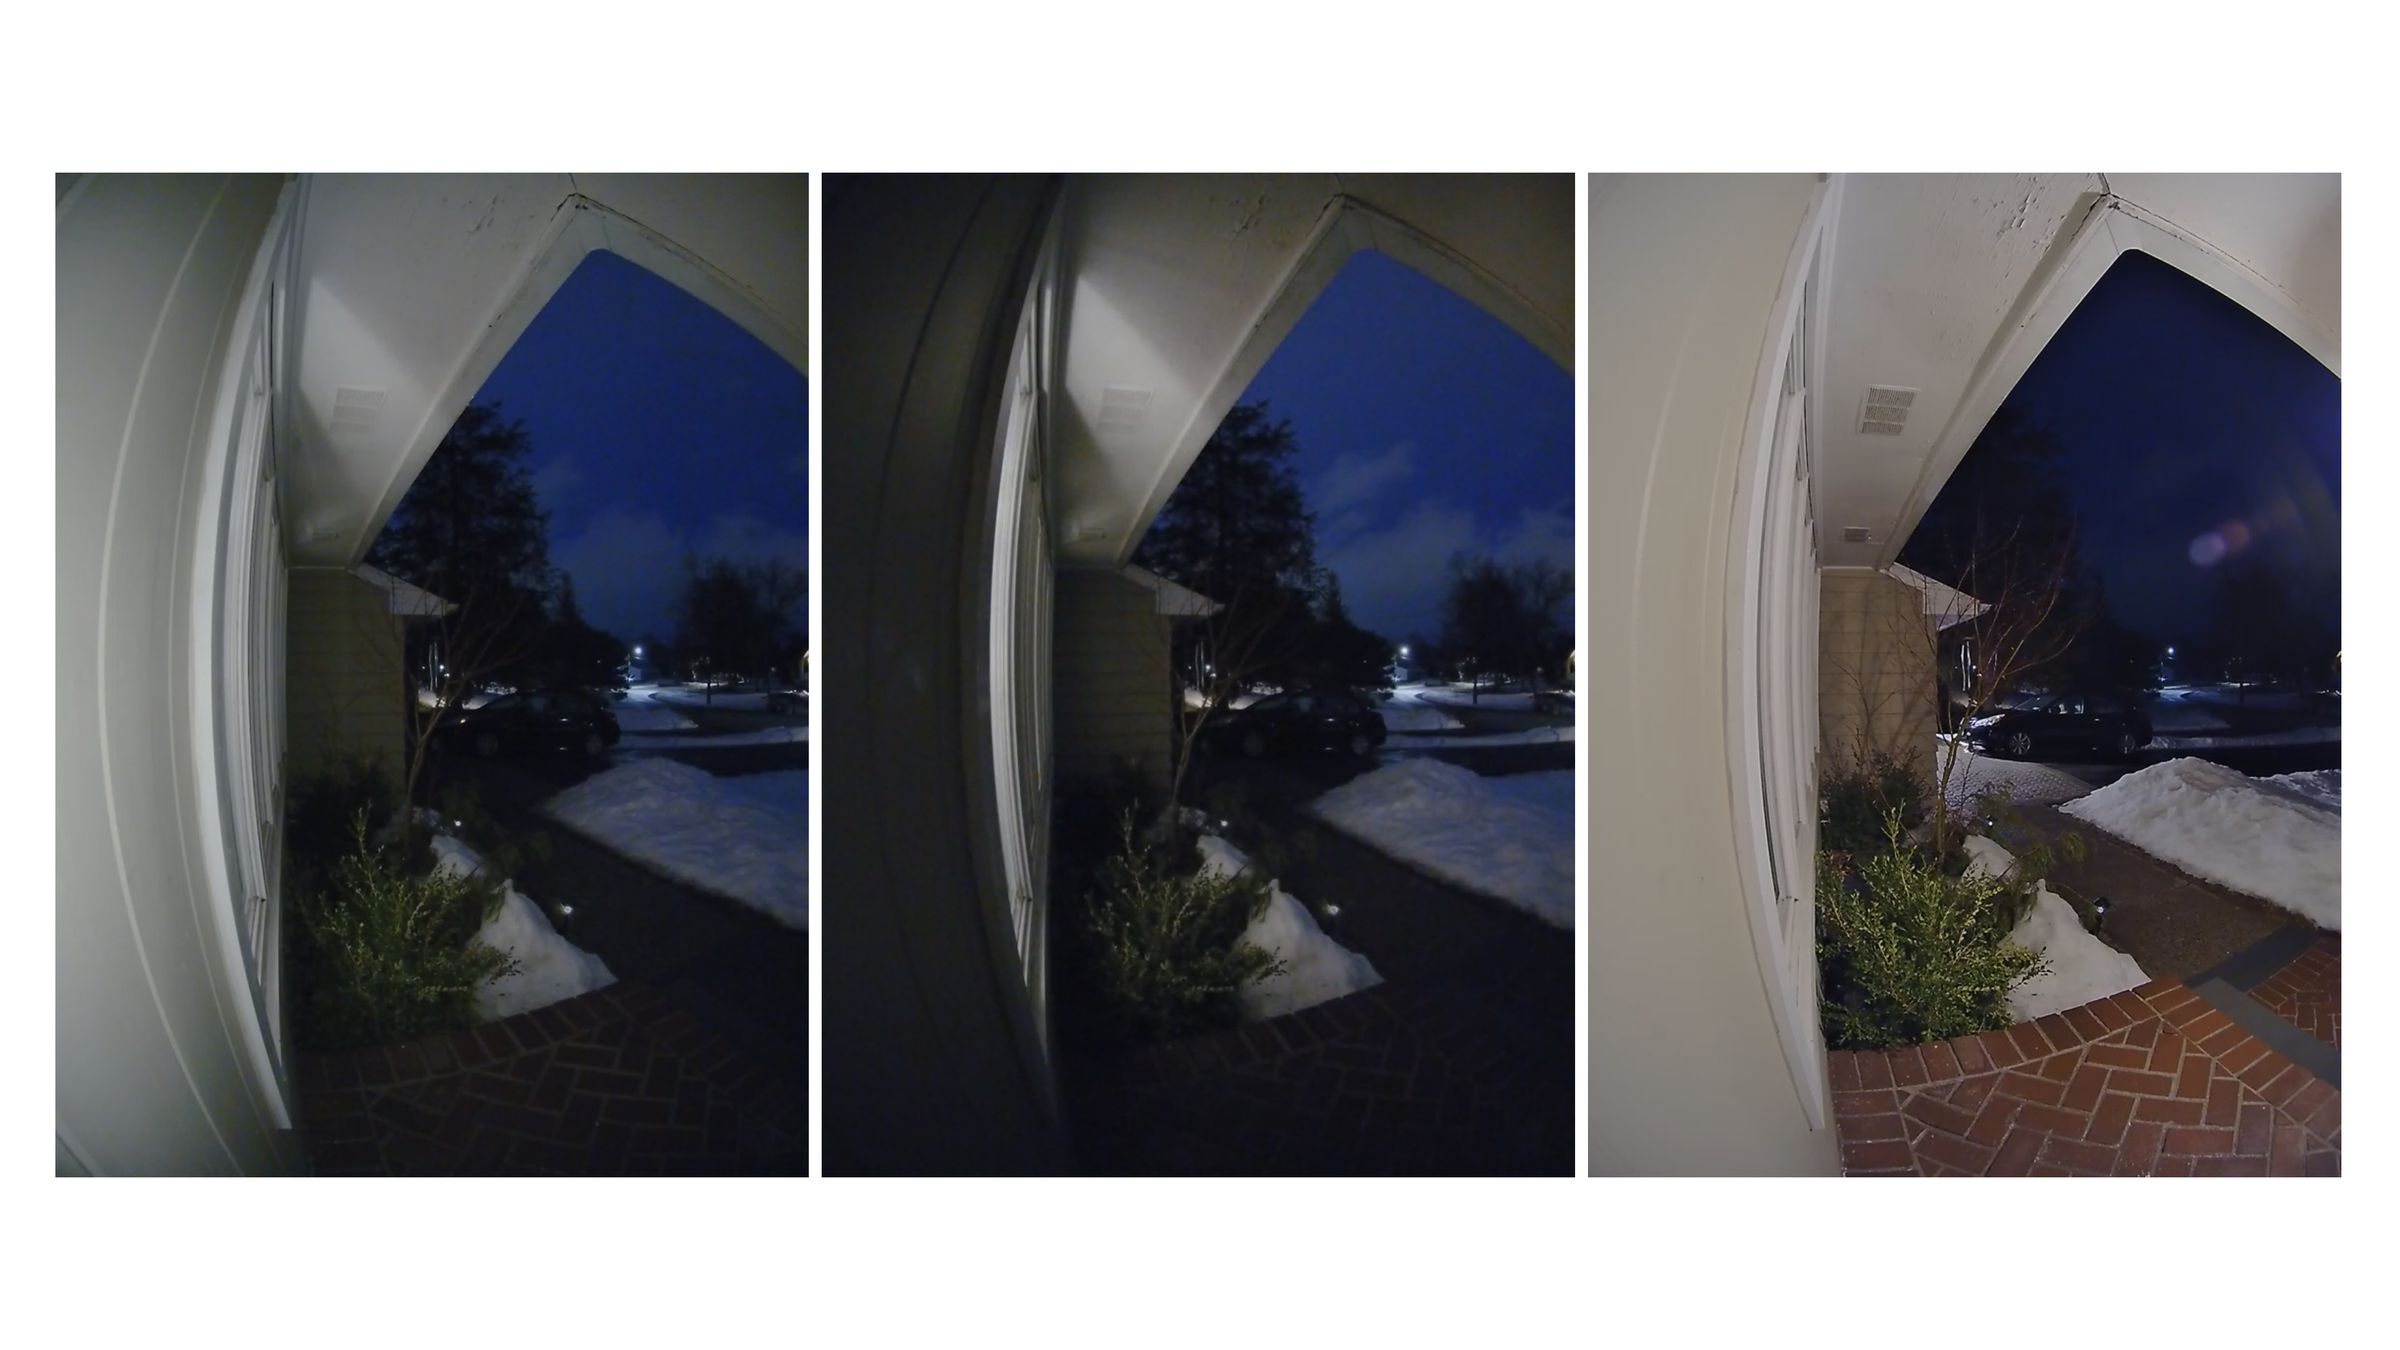 From left to right: the Circle View’s image at night with the nightlight on, the nightlight off, and with a porchlight on.